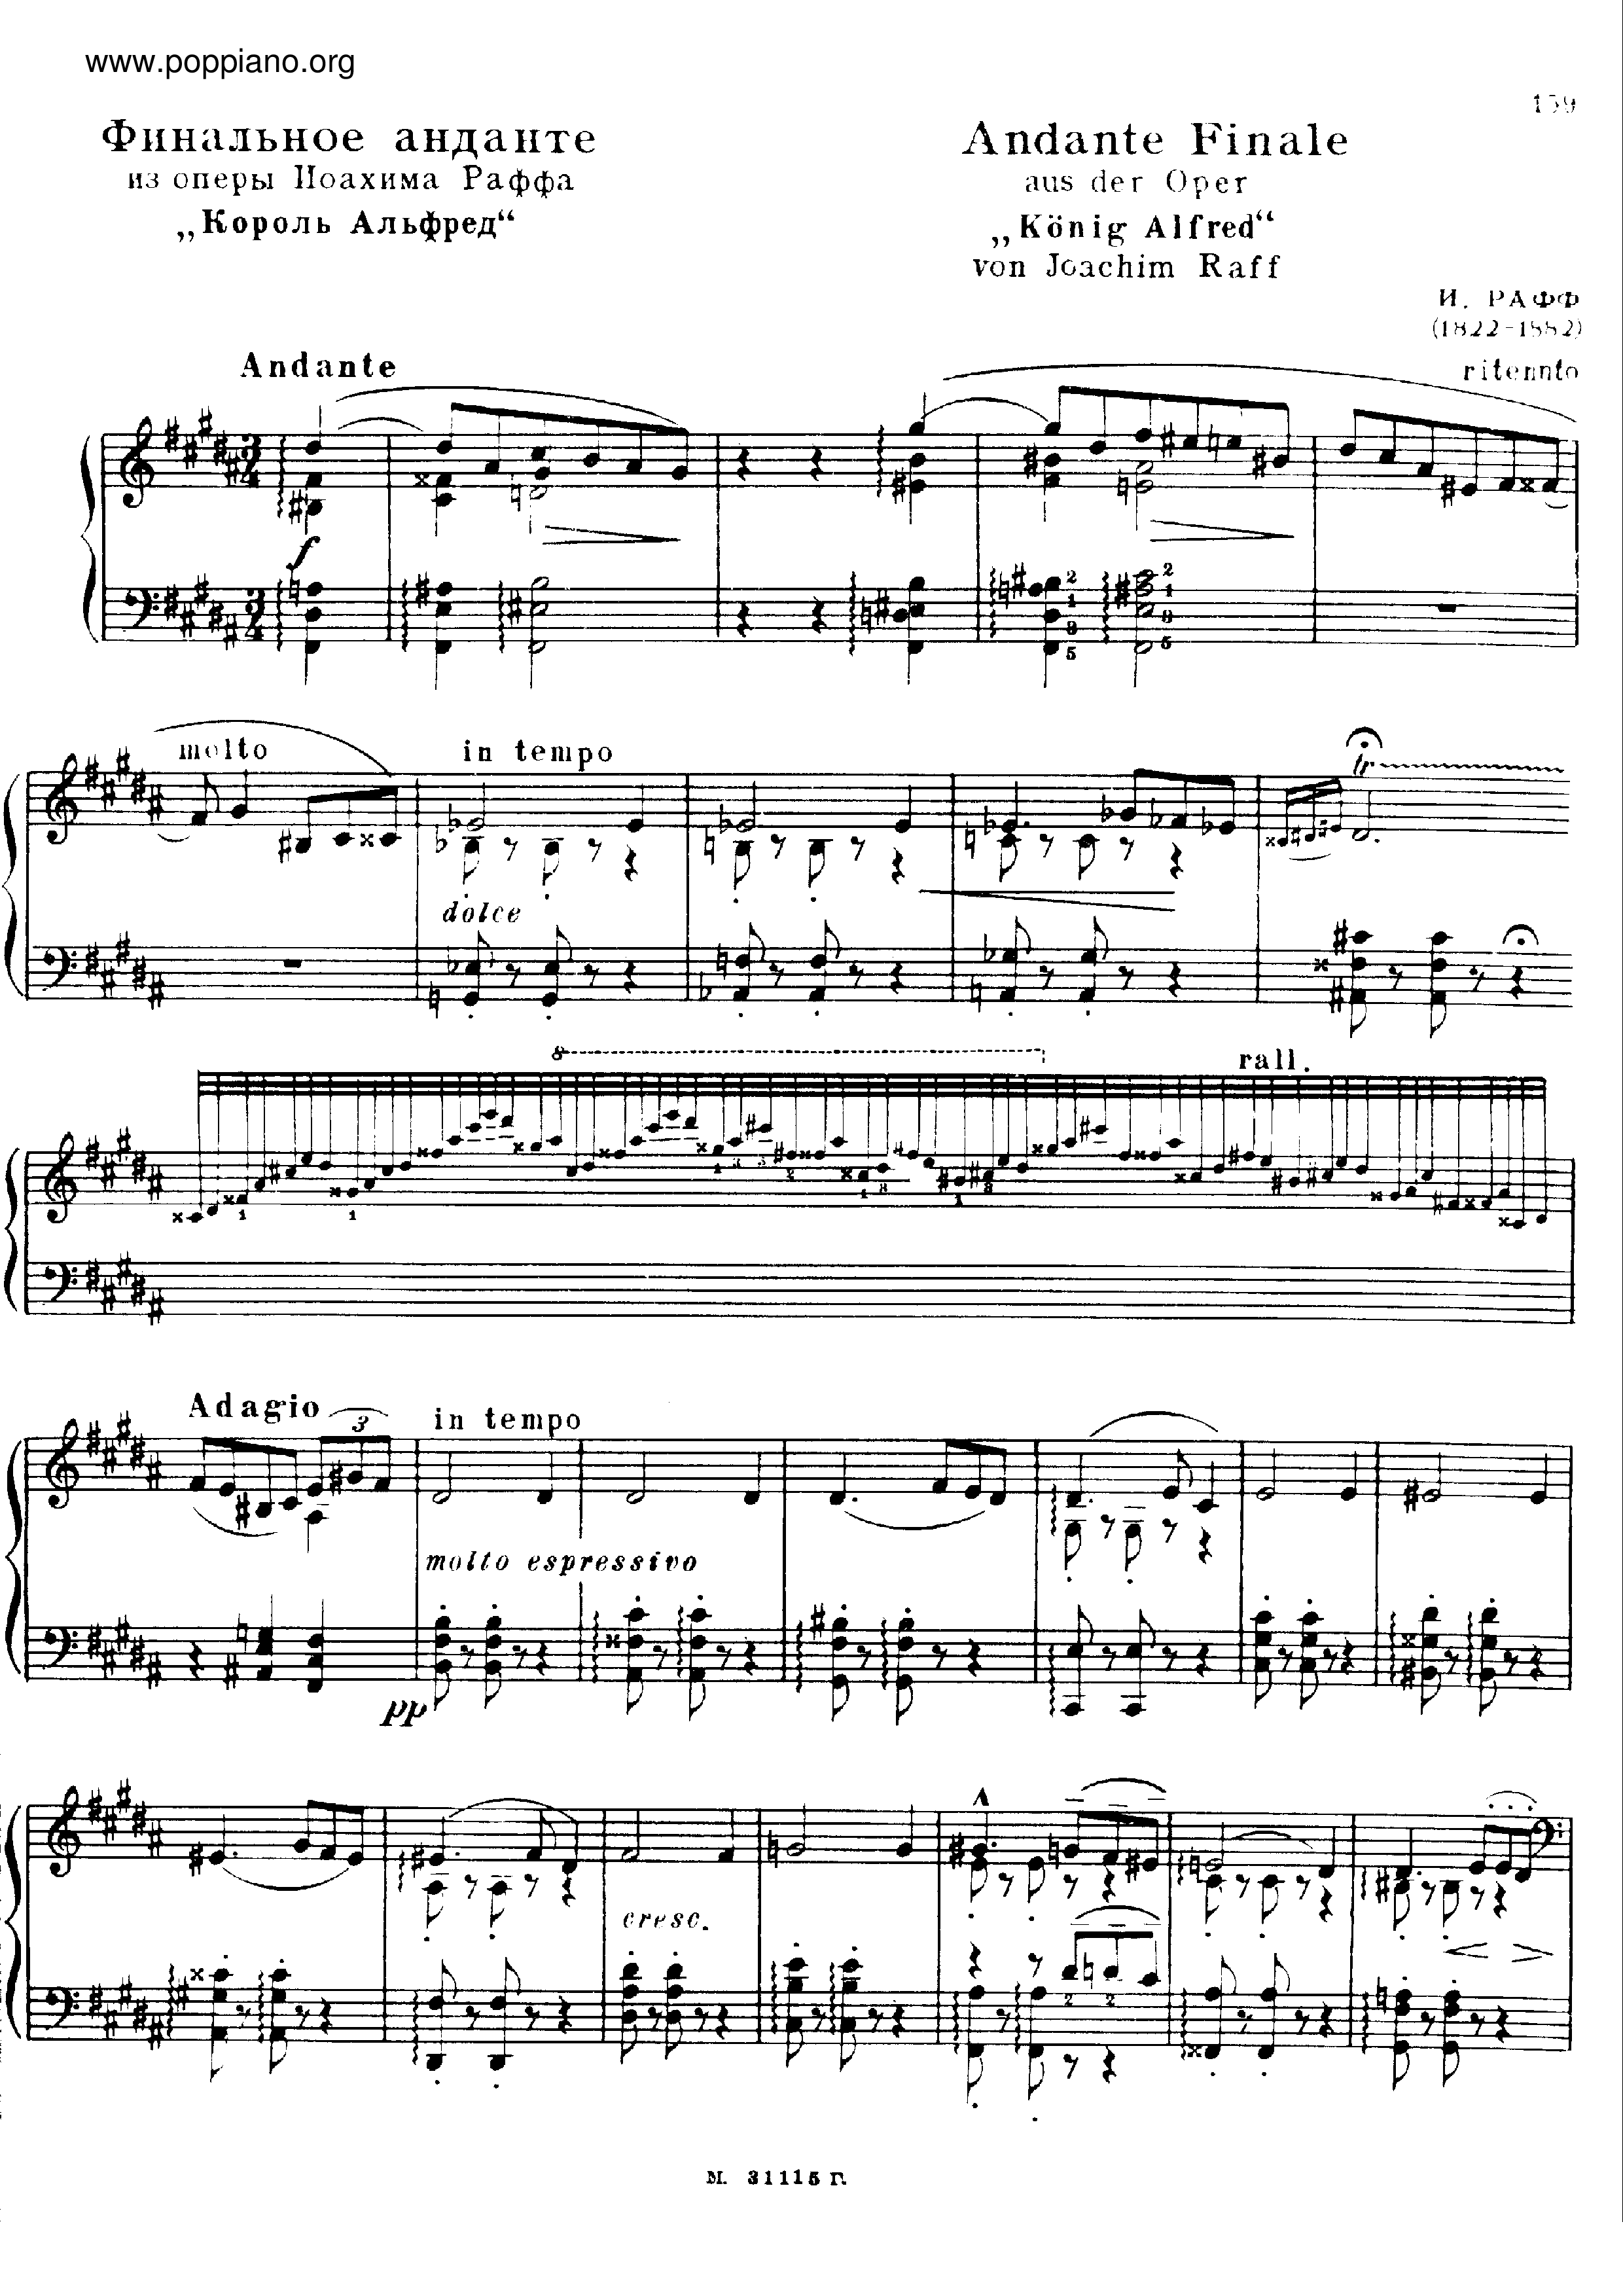 Andante Finale and March (opera Koning Alfred), S.421 Score